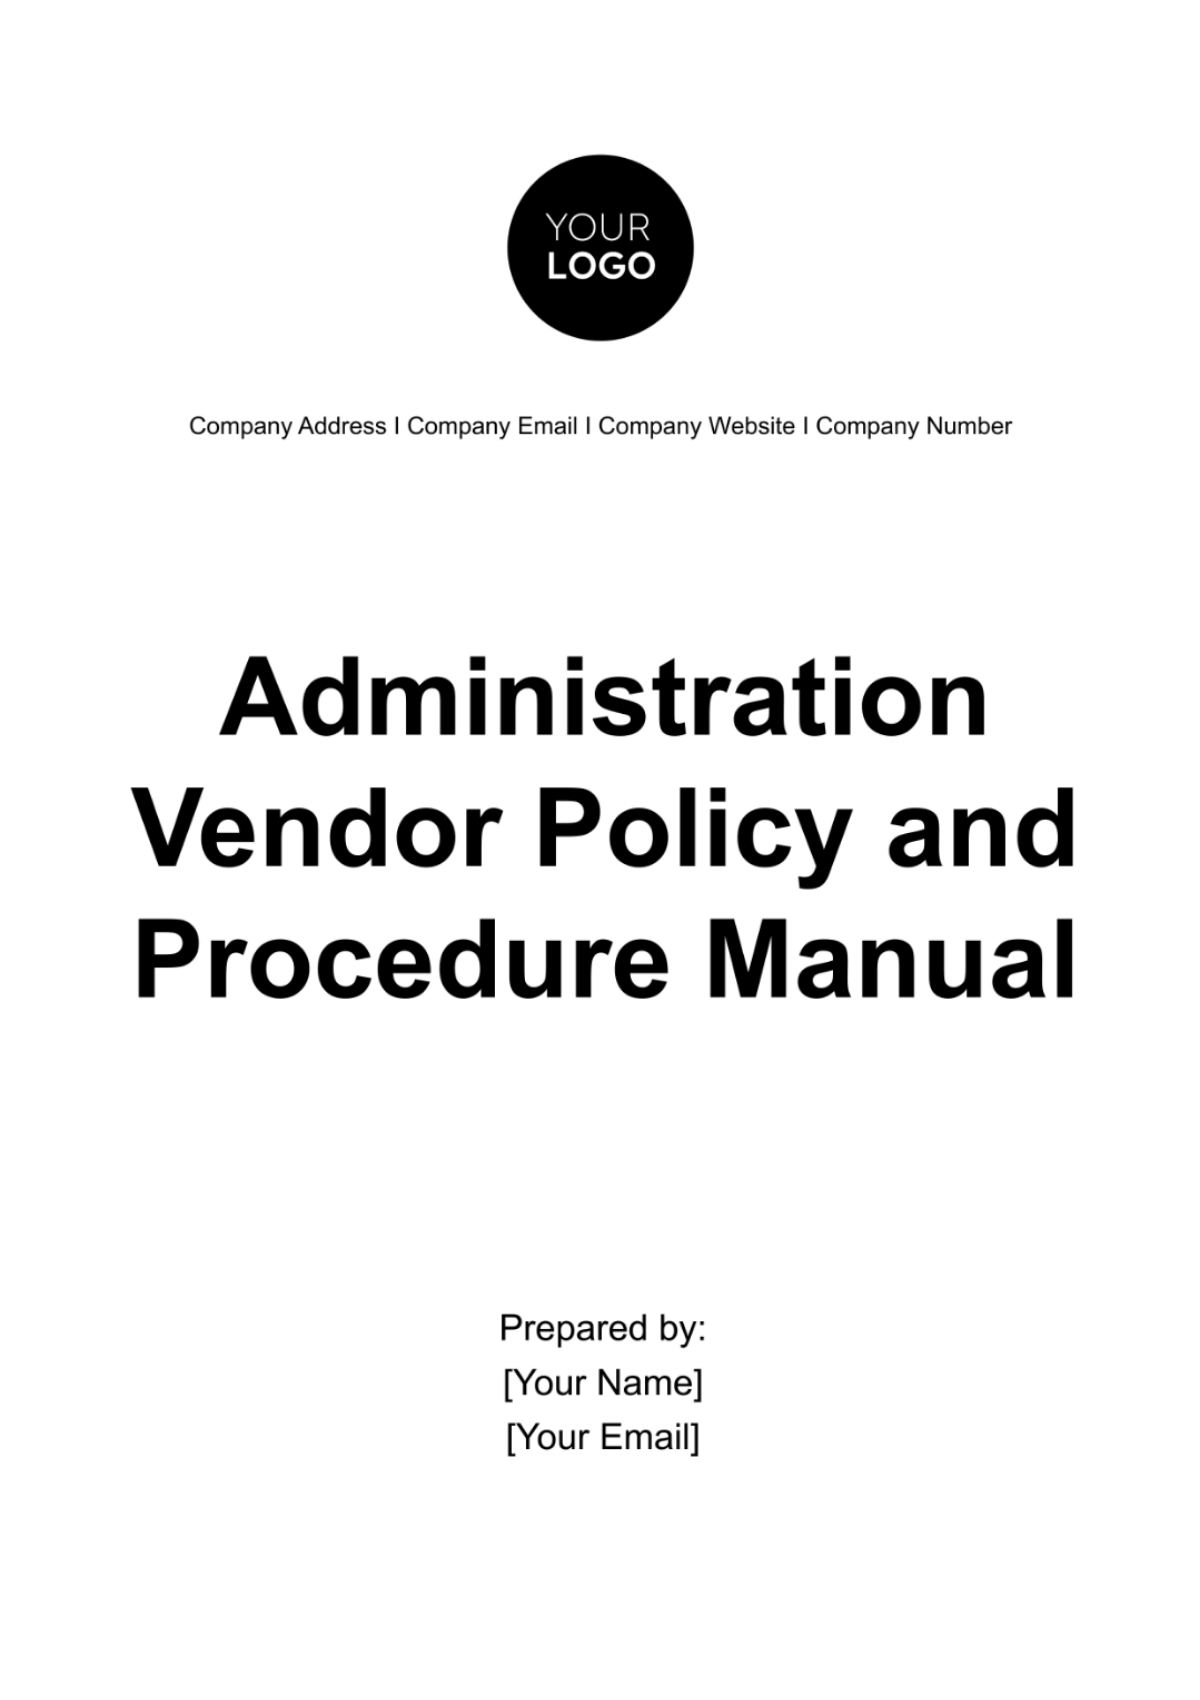 Free Administration Vendor Policy and Procedure Manual Template